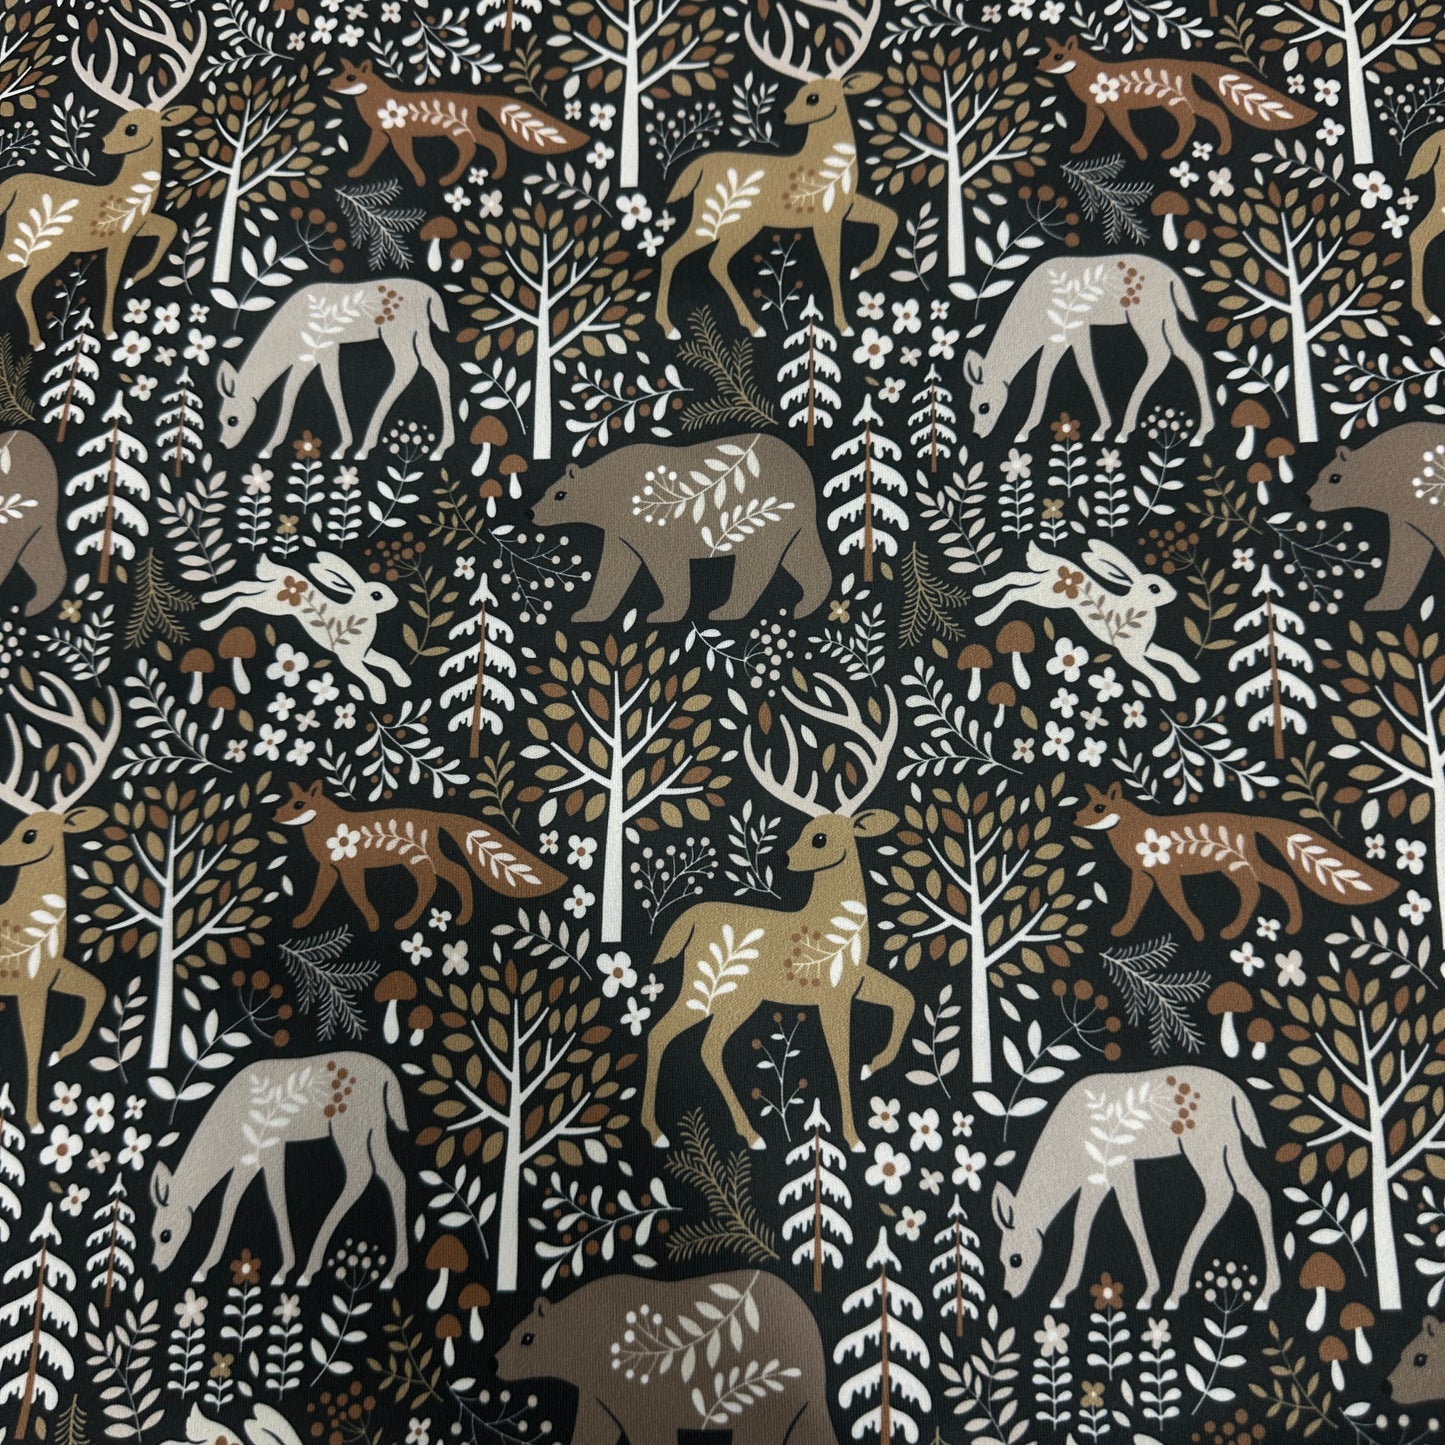 Critters in the Wild 1 mil PUL Fabric - Made in the USA